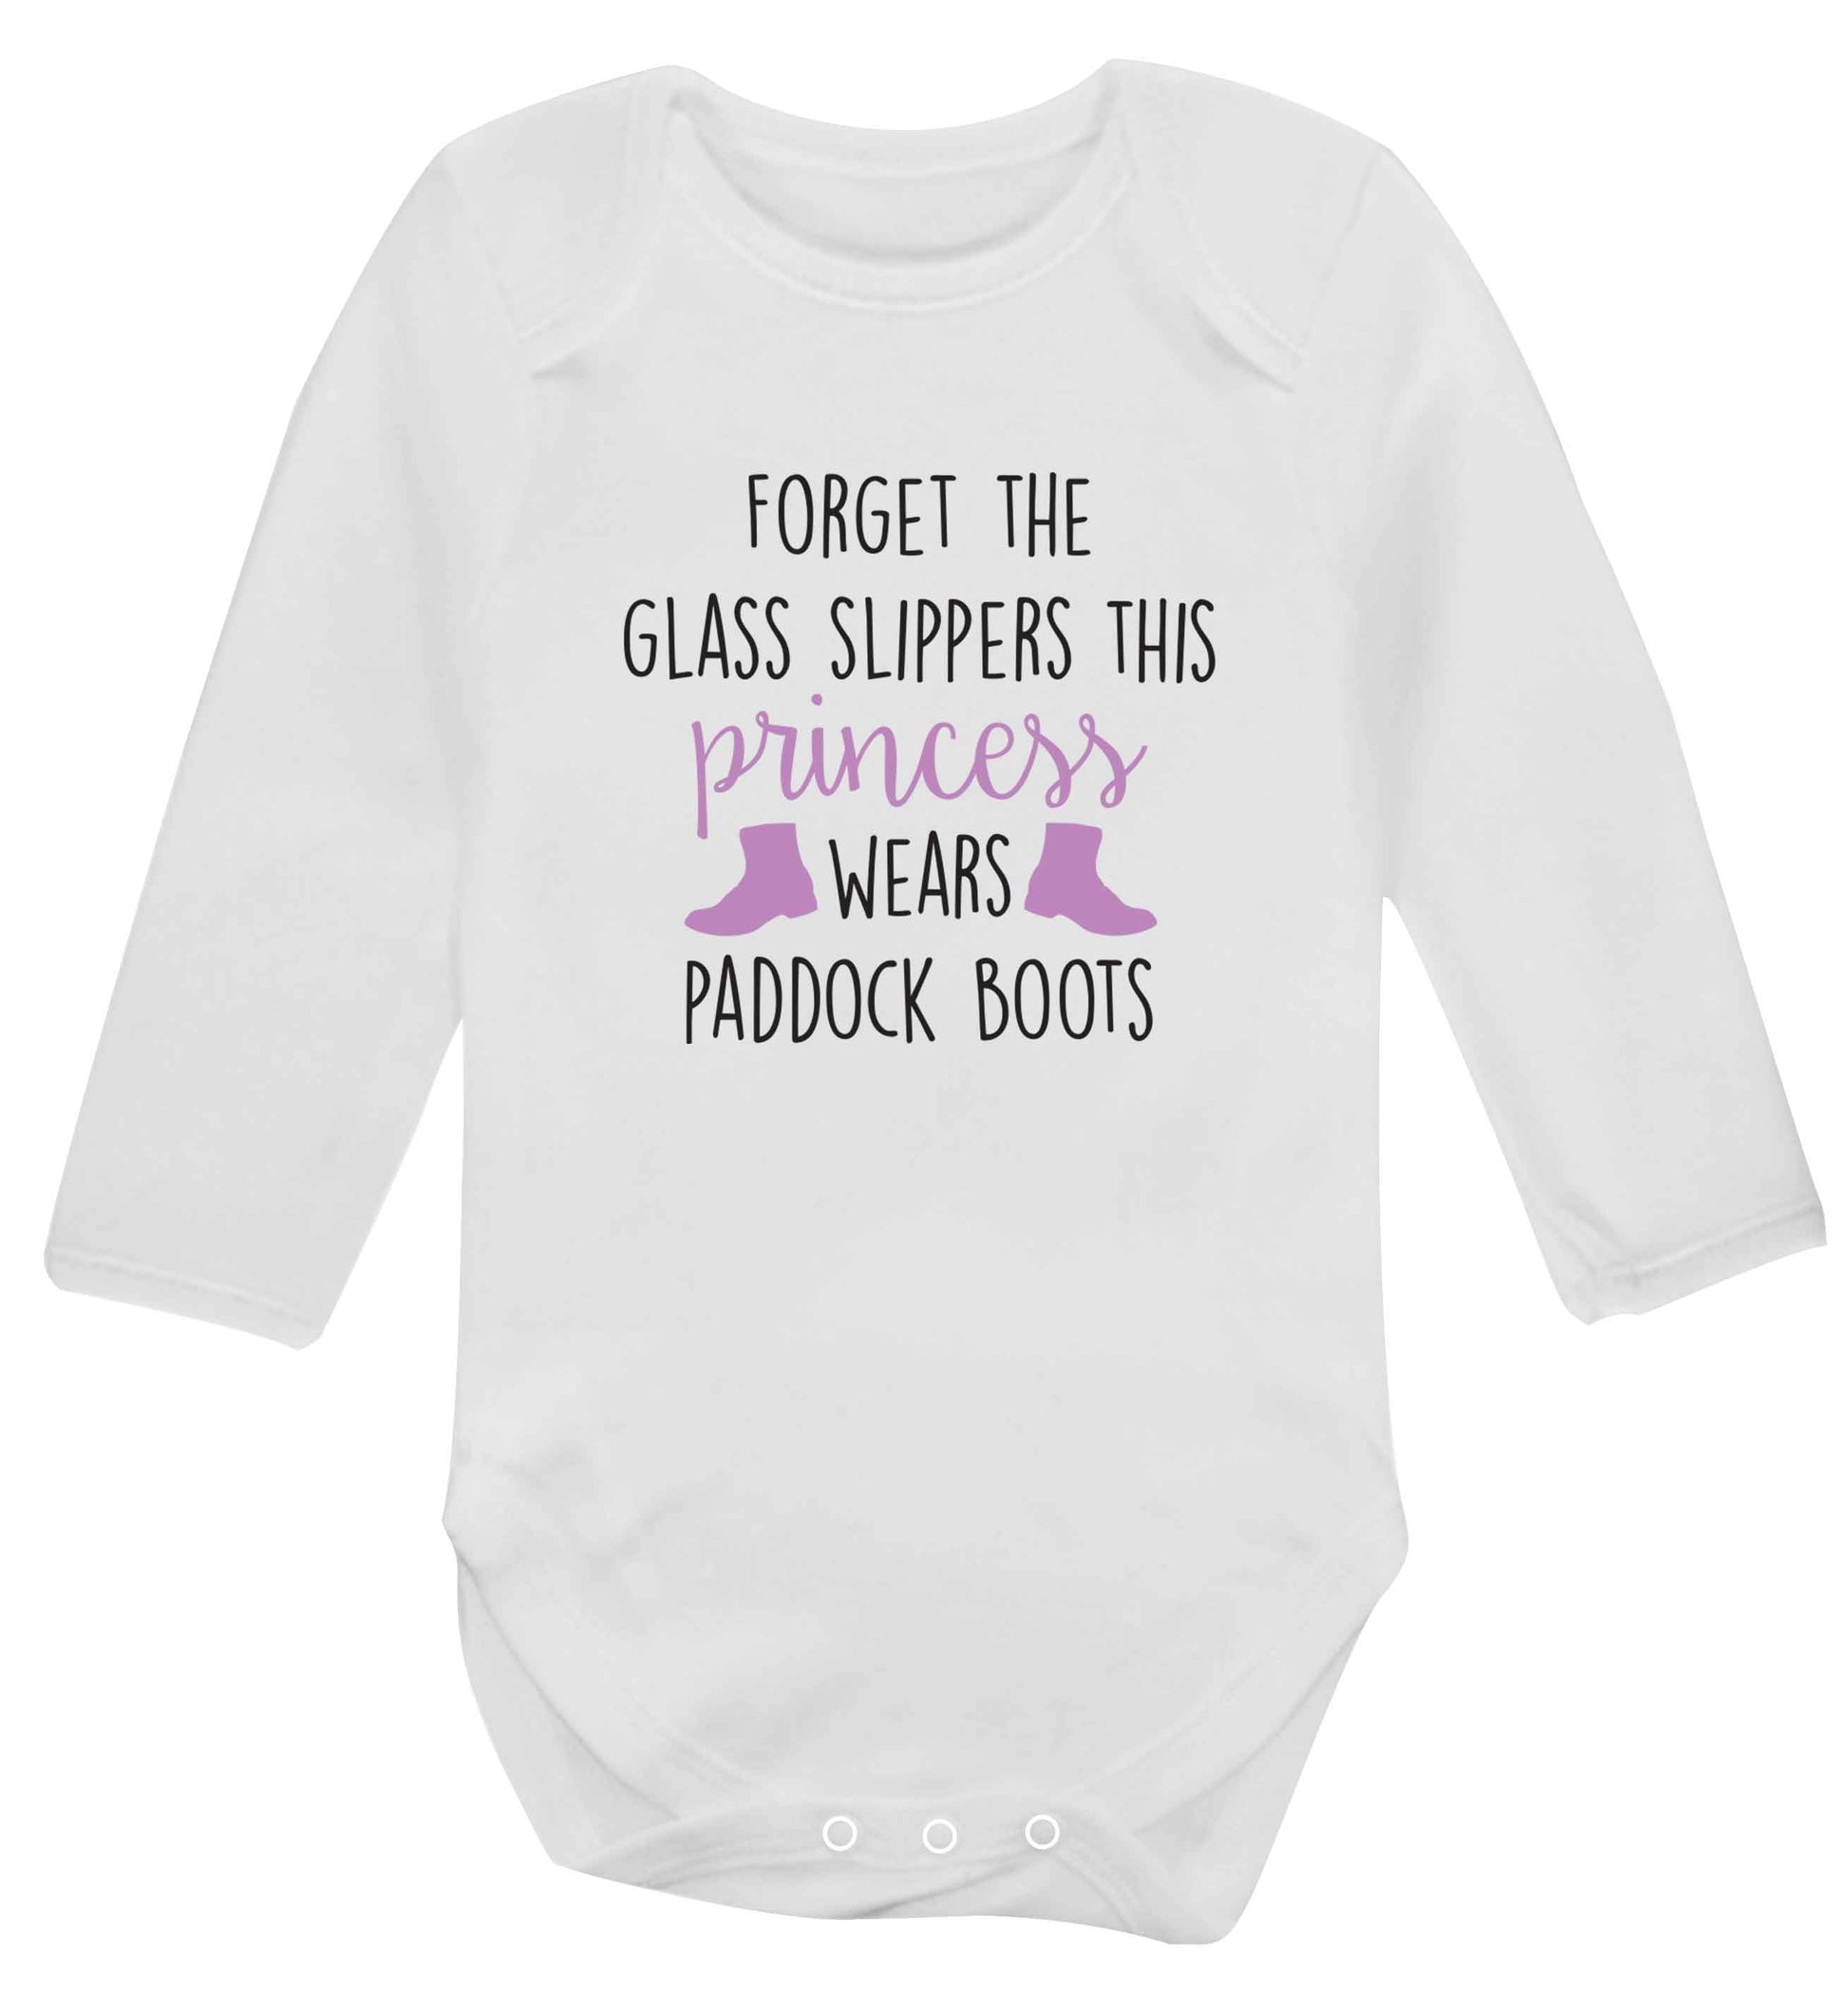 Forget the glass slippers this princess wears paddock boots baby vest long sleeved white 6-12 months